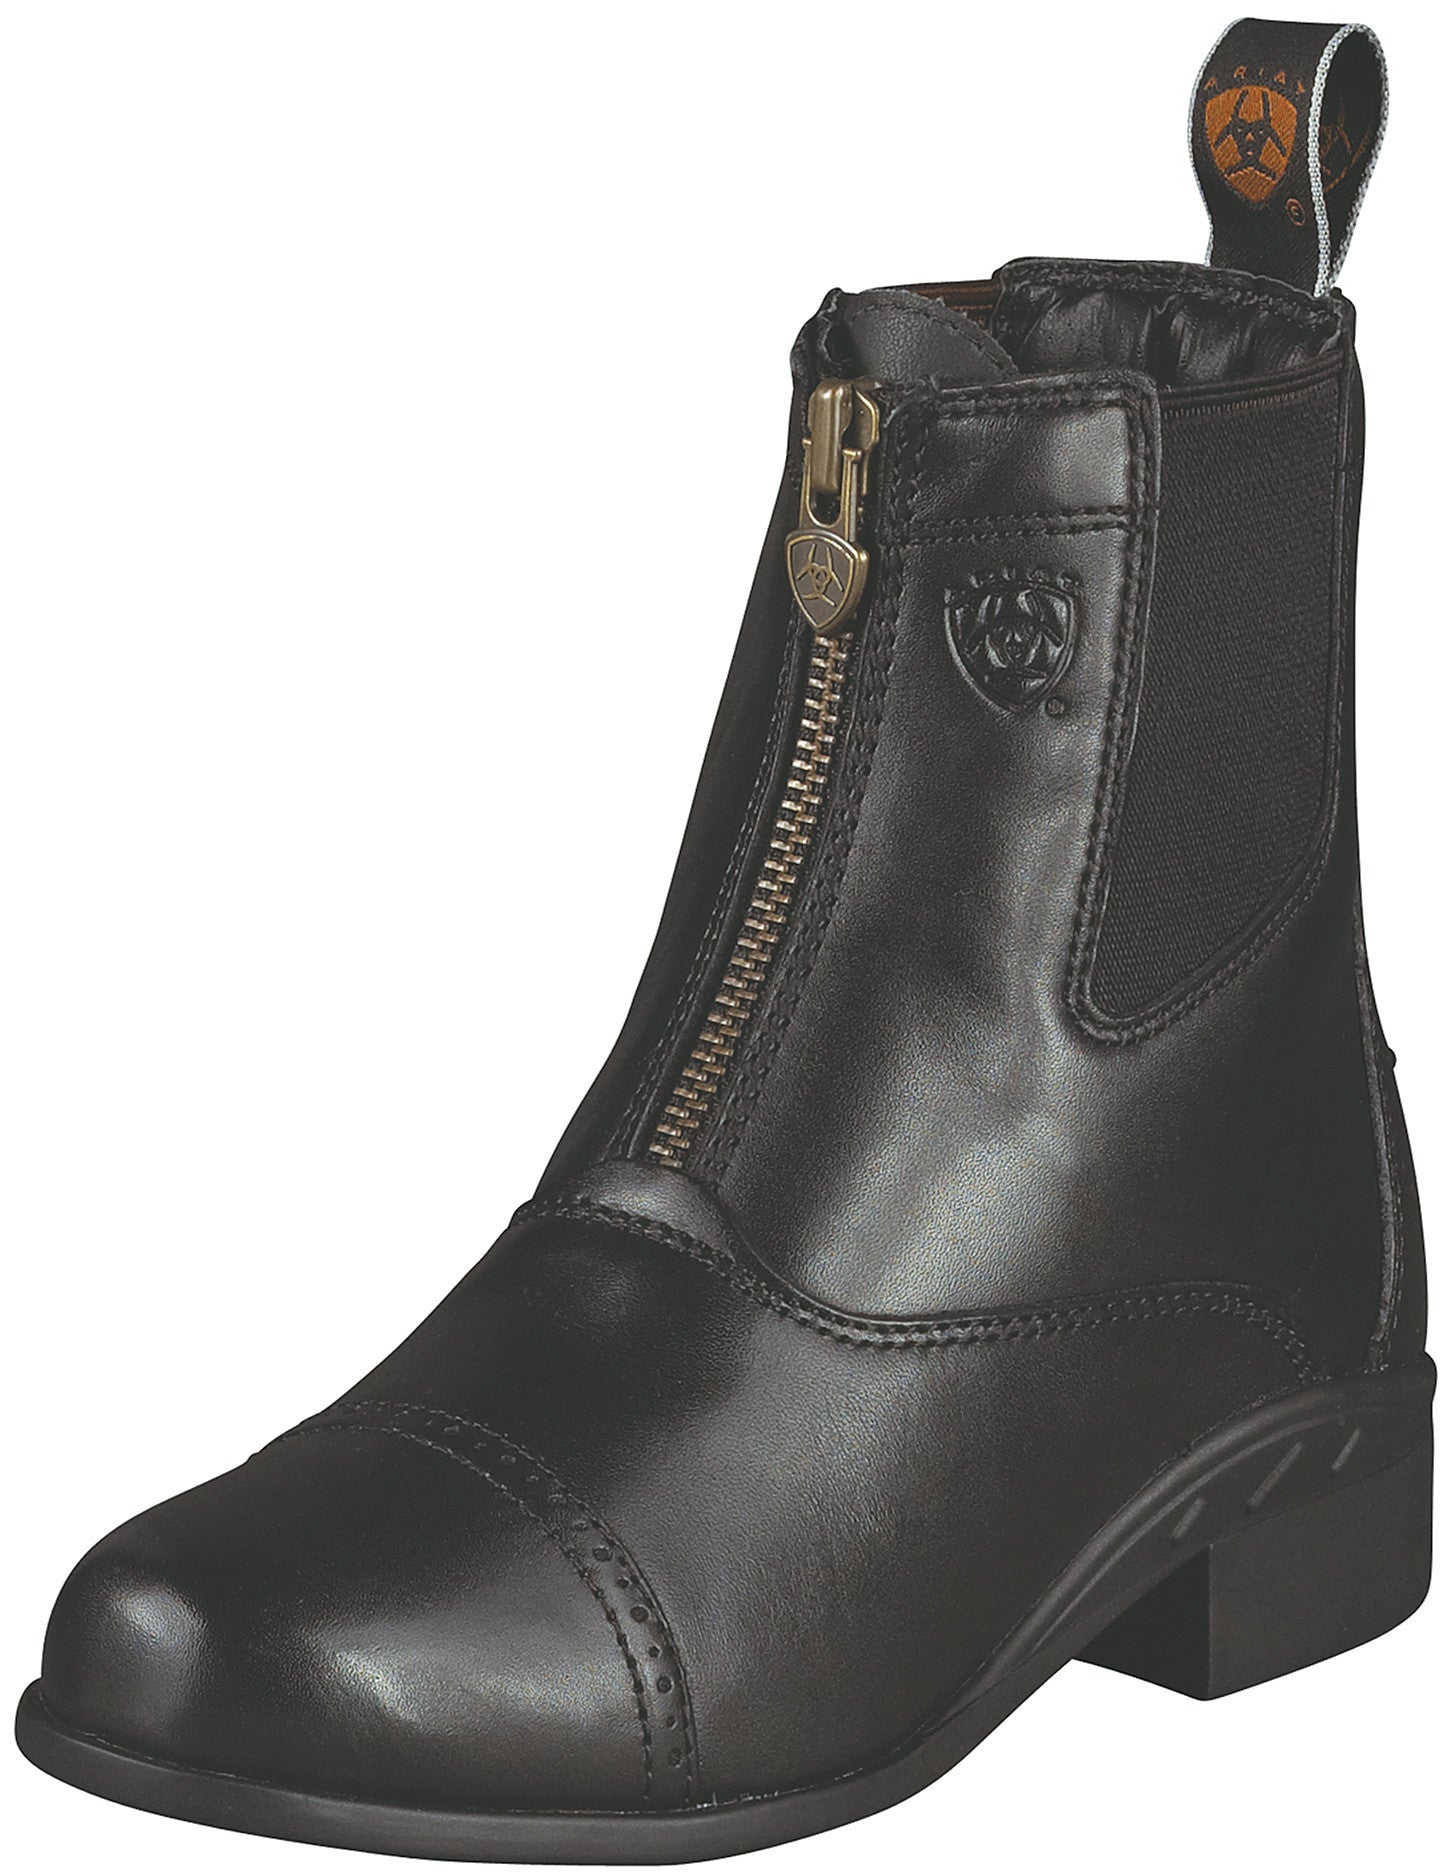 Women's Short Boots – Drovers Saddlery